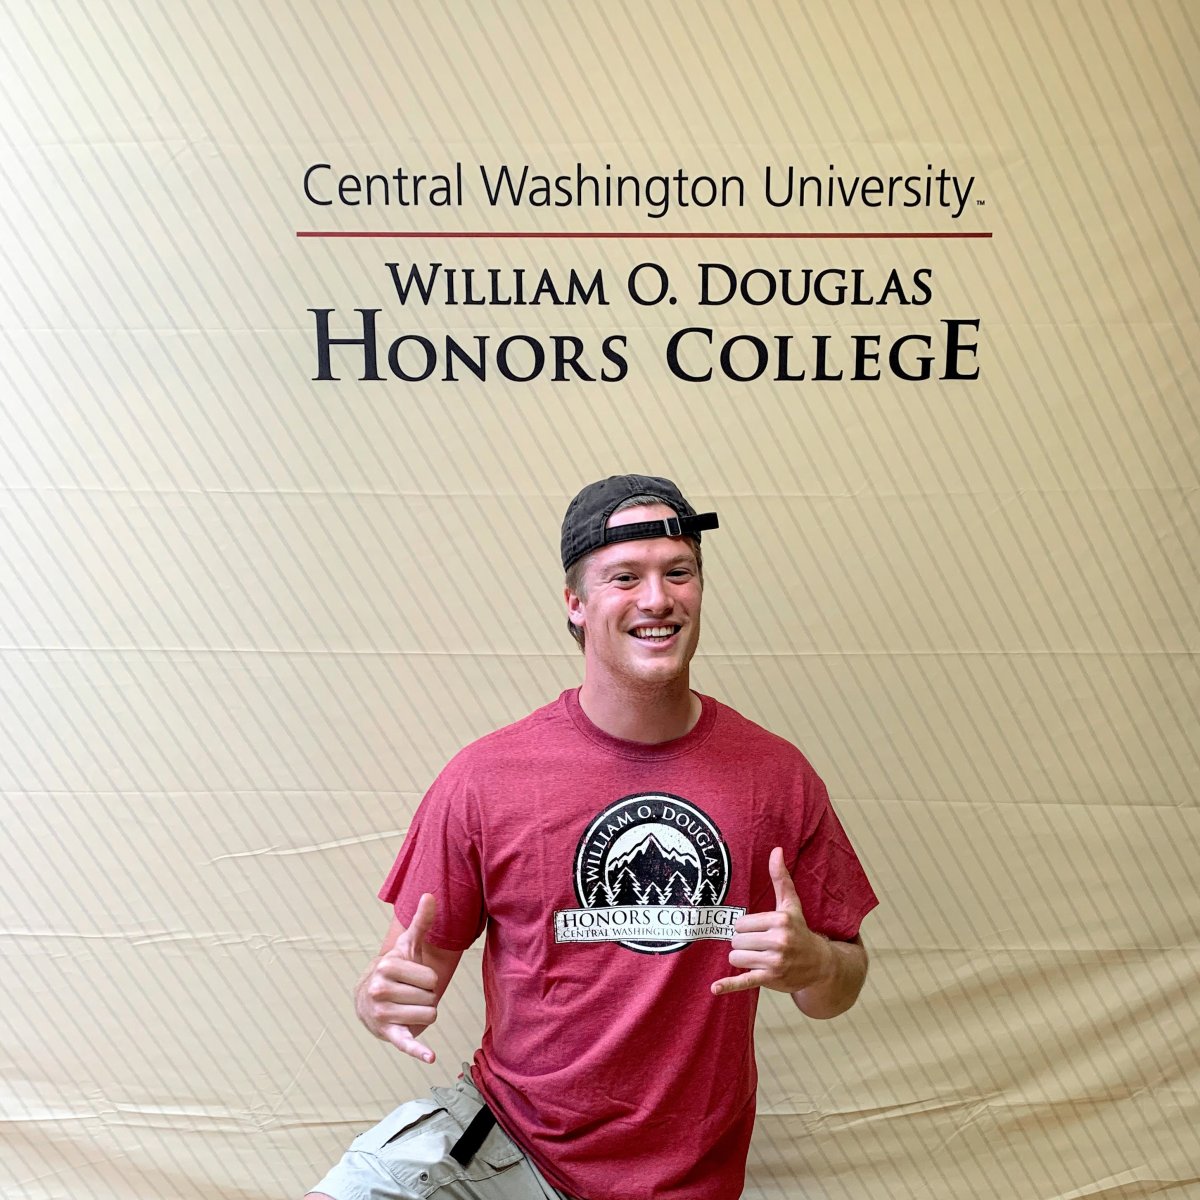 Noah Christy smiling posing in front of a CWU Douglas Honors College background.